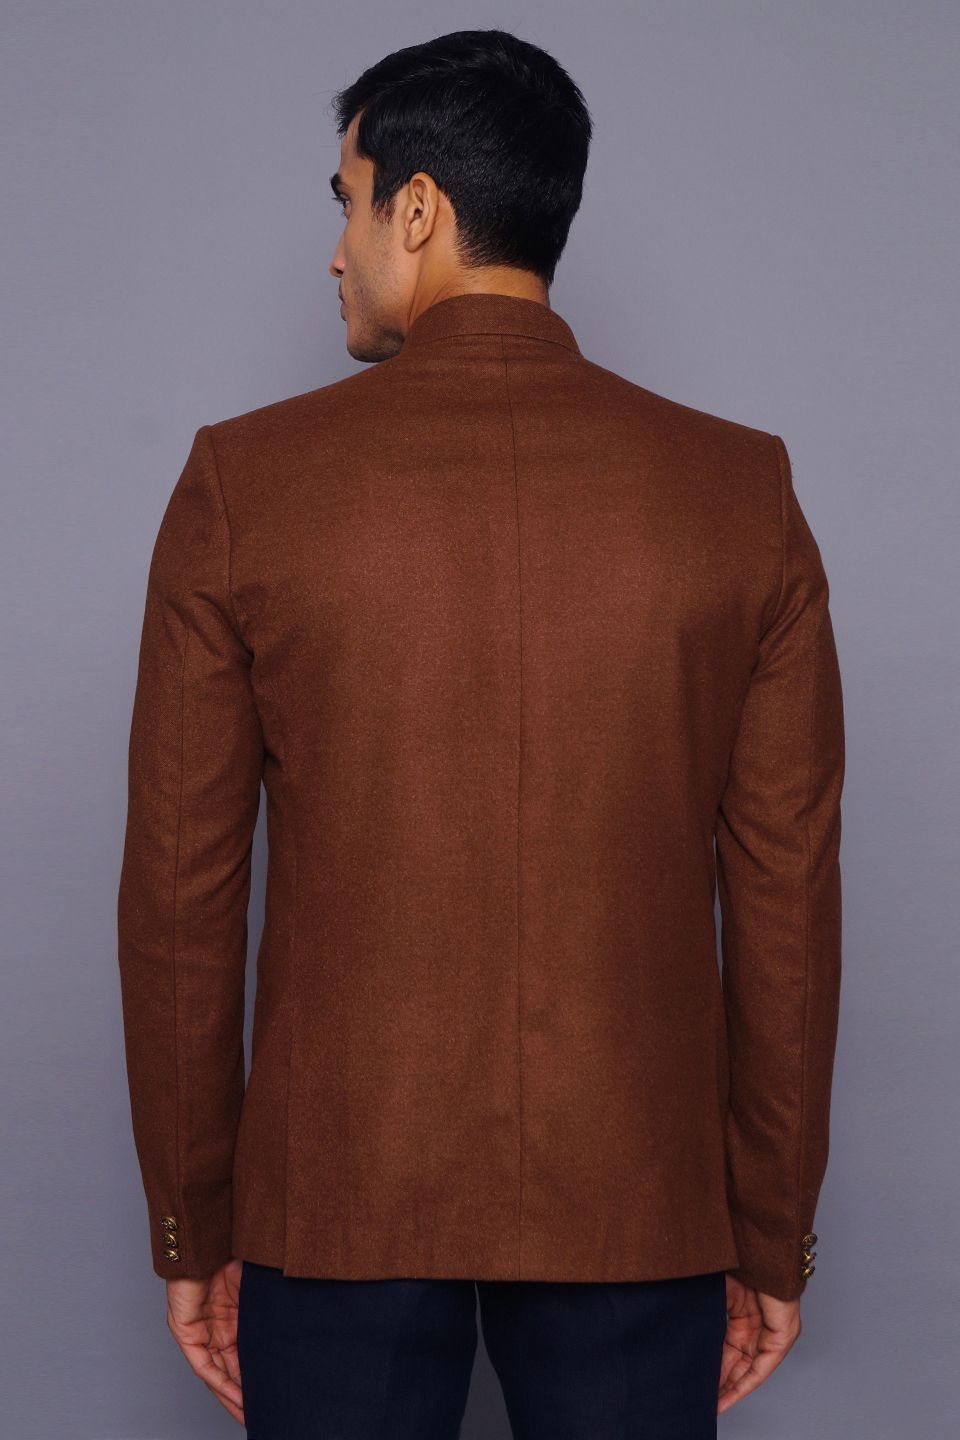 Wintage Men's Wool Casual and Festive Bandhgala Blazer : Brown 1